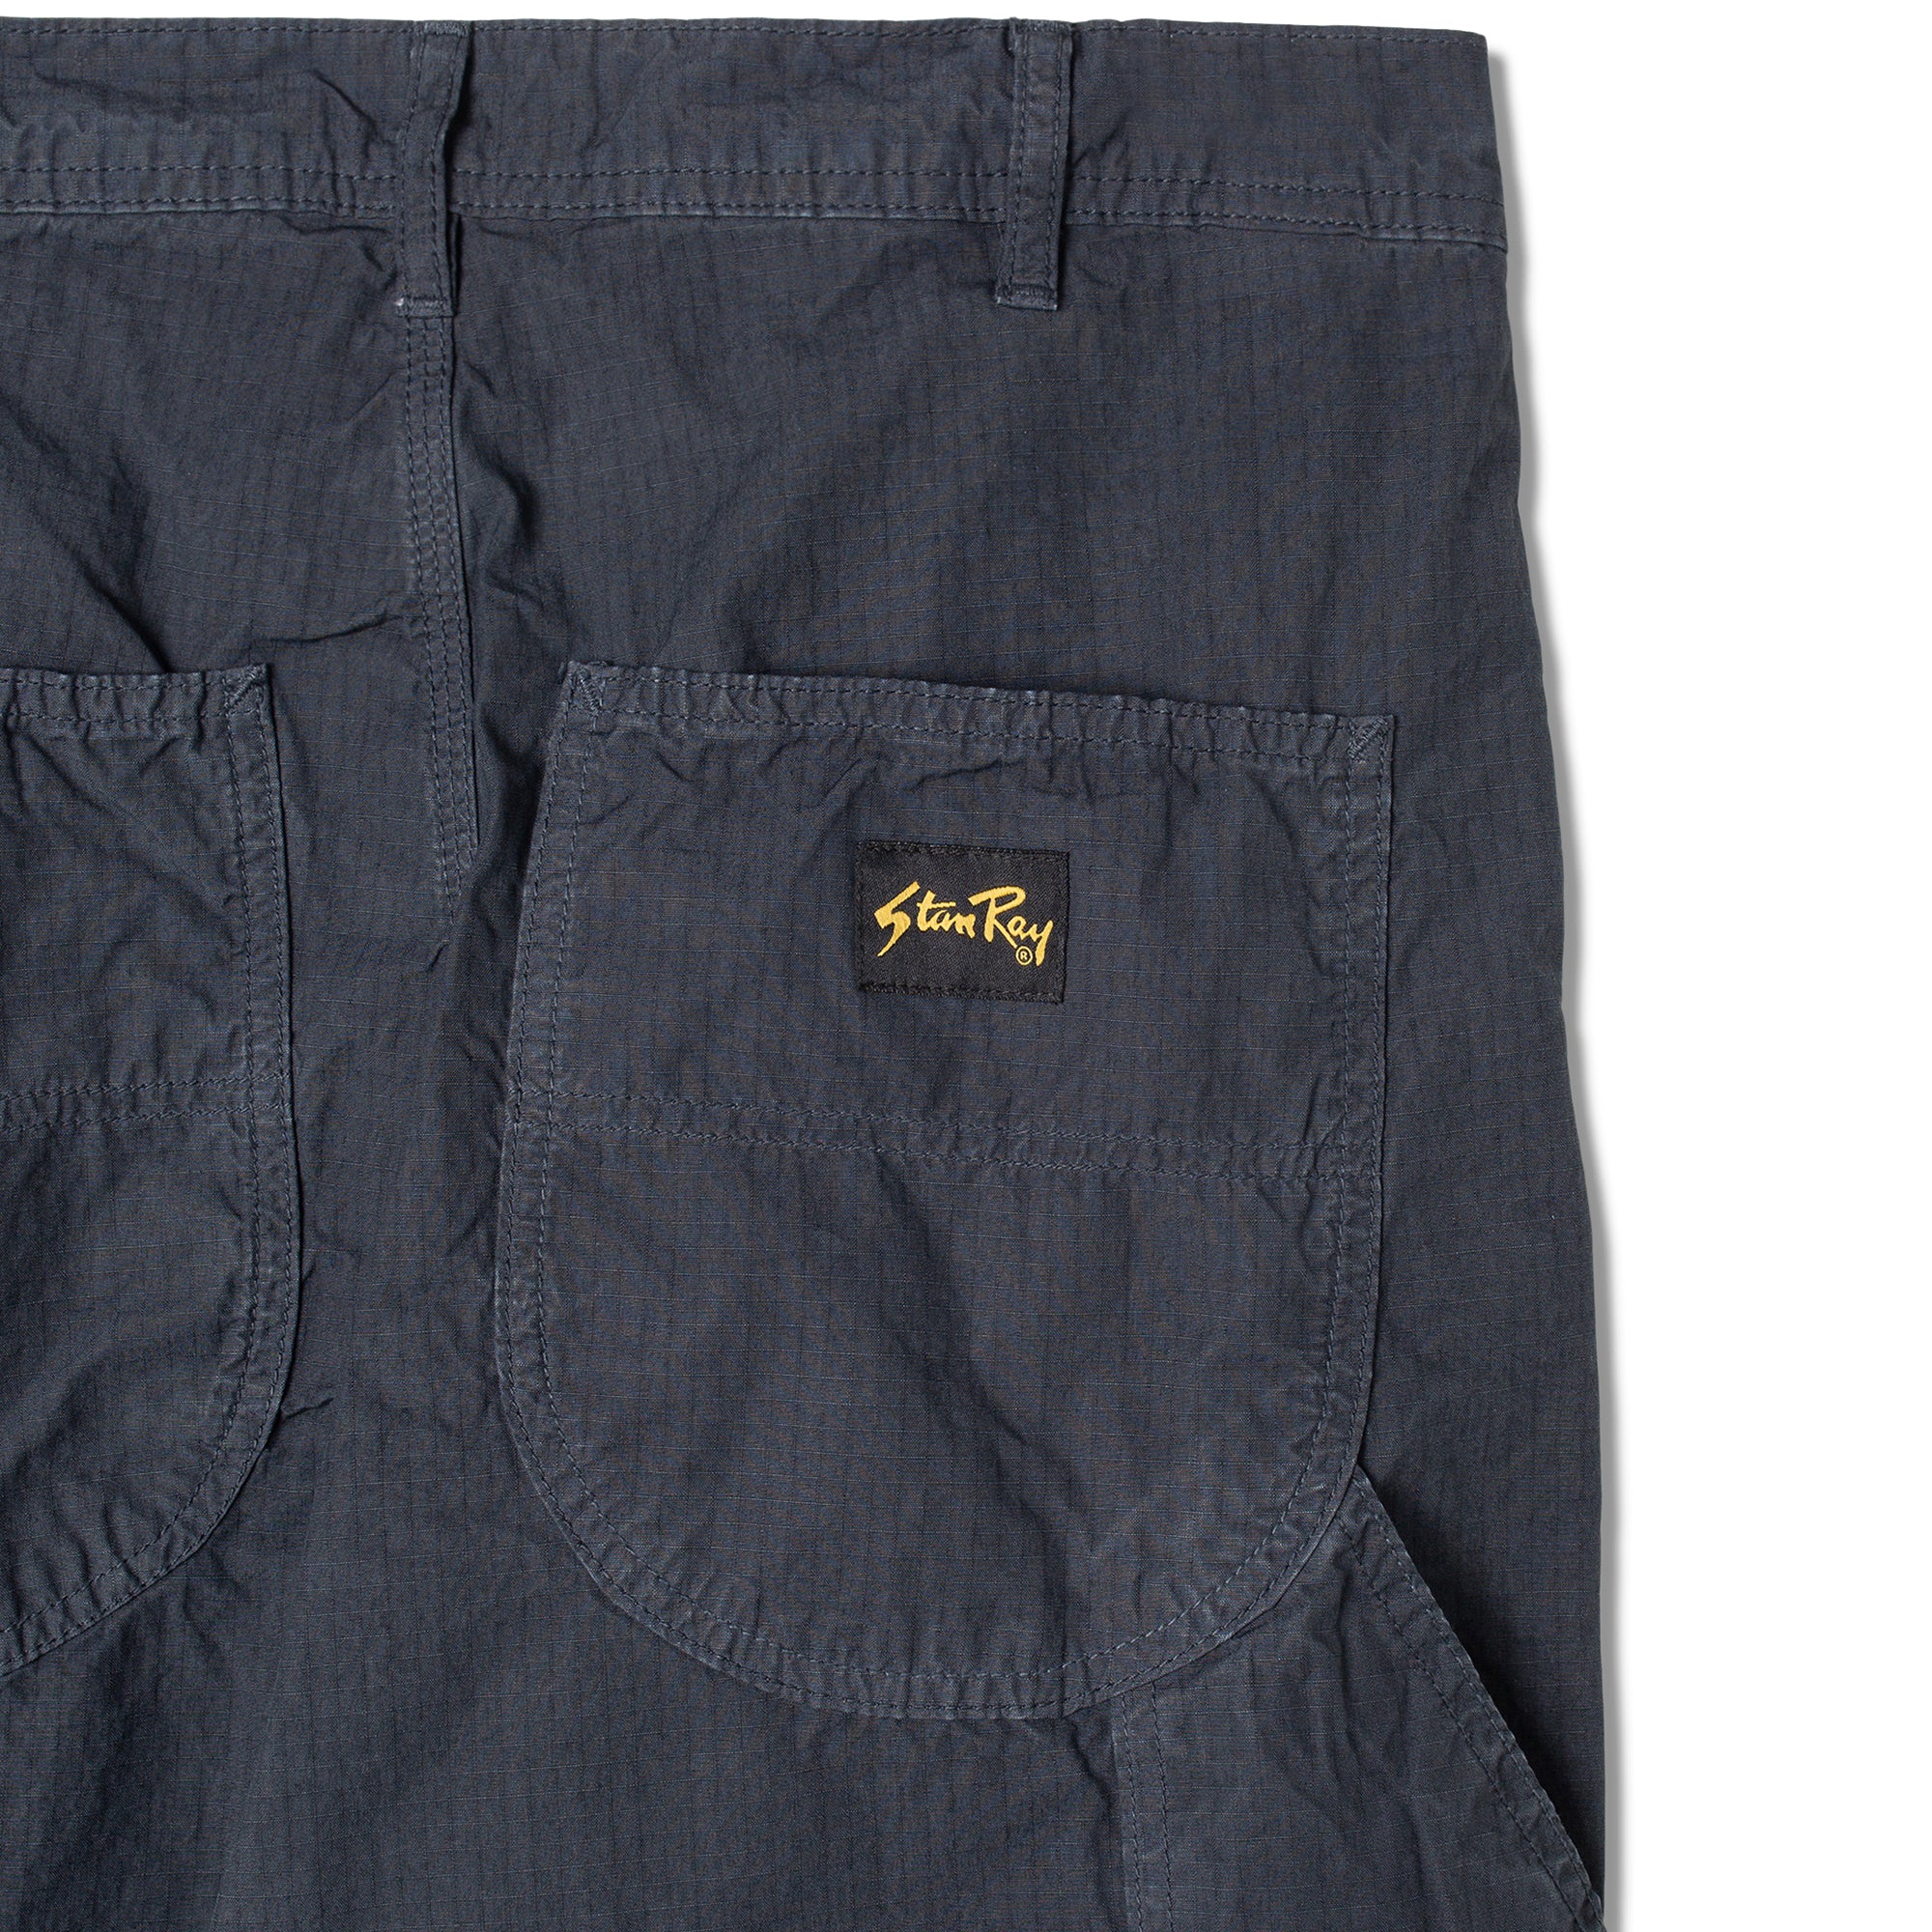 Stan Ray 80s Painter Pant - Navy Ripstop